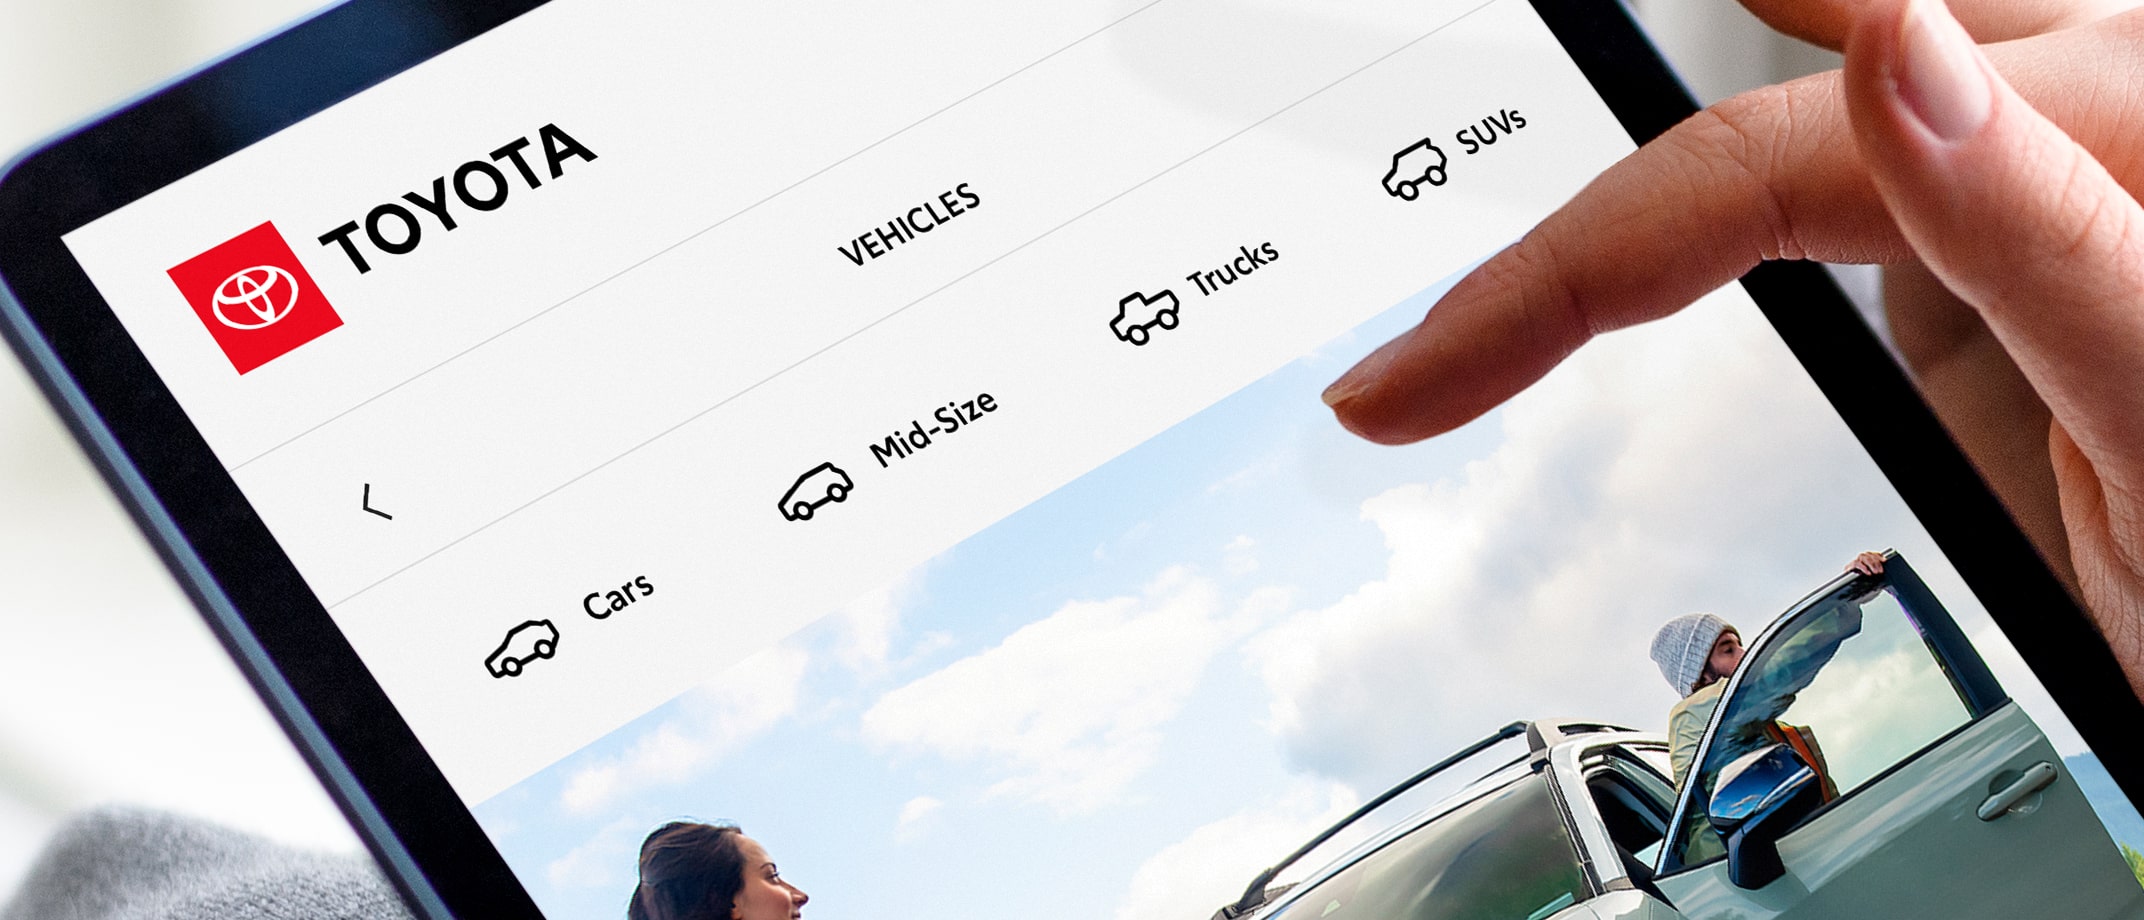 A hand hovers above a tablet screen showing a Toyota webpage with different vehicle icons for “Cars,” “Mid-Size,” “Trucks” and “SUVs.”